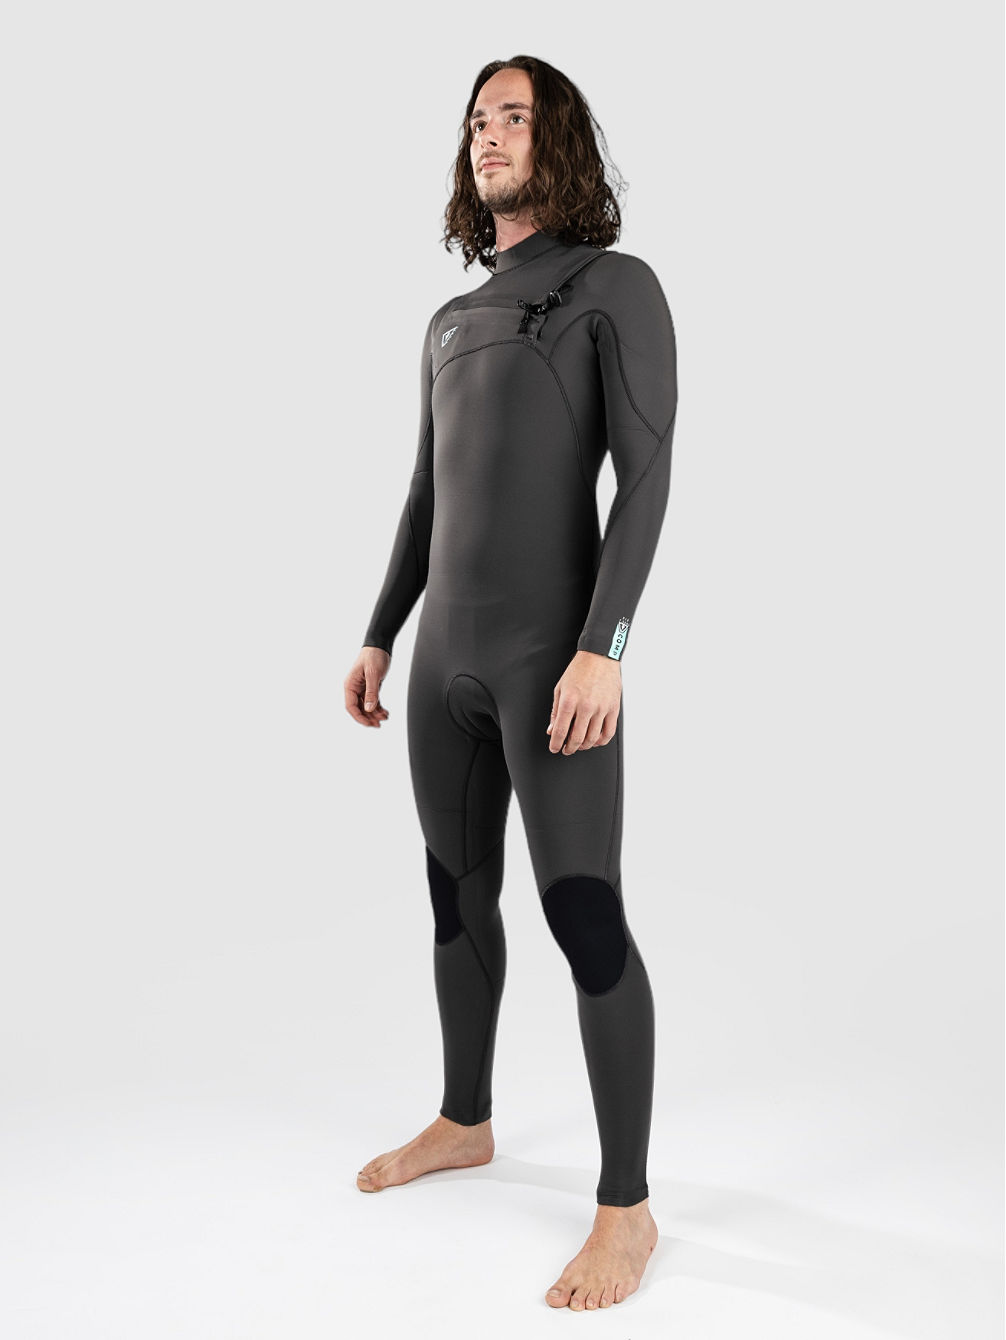 7 Seas Comp 4/3mm Full Chest Wetsuit